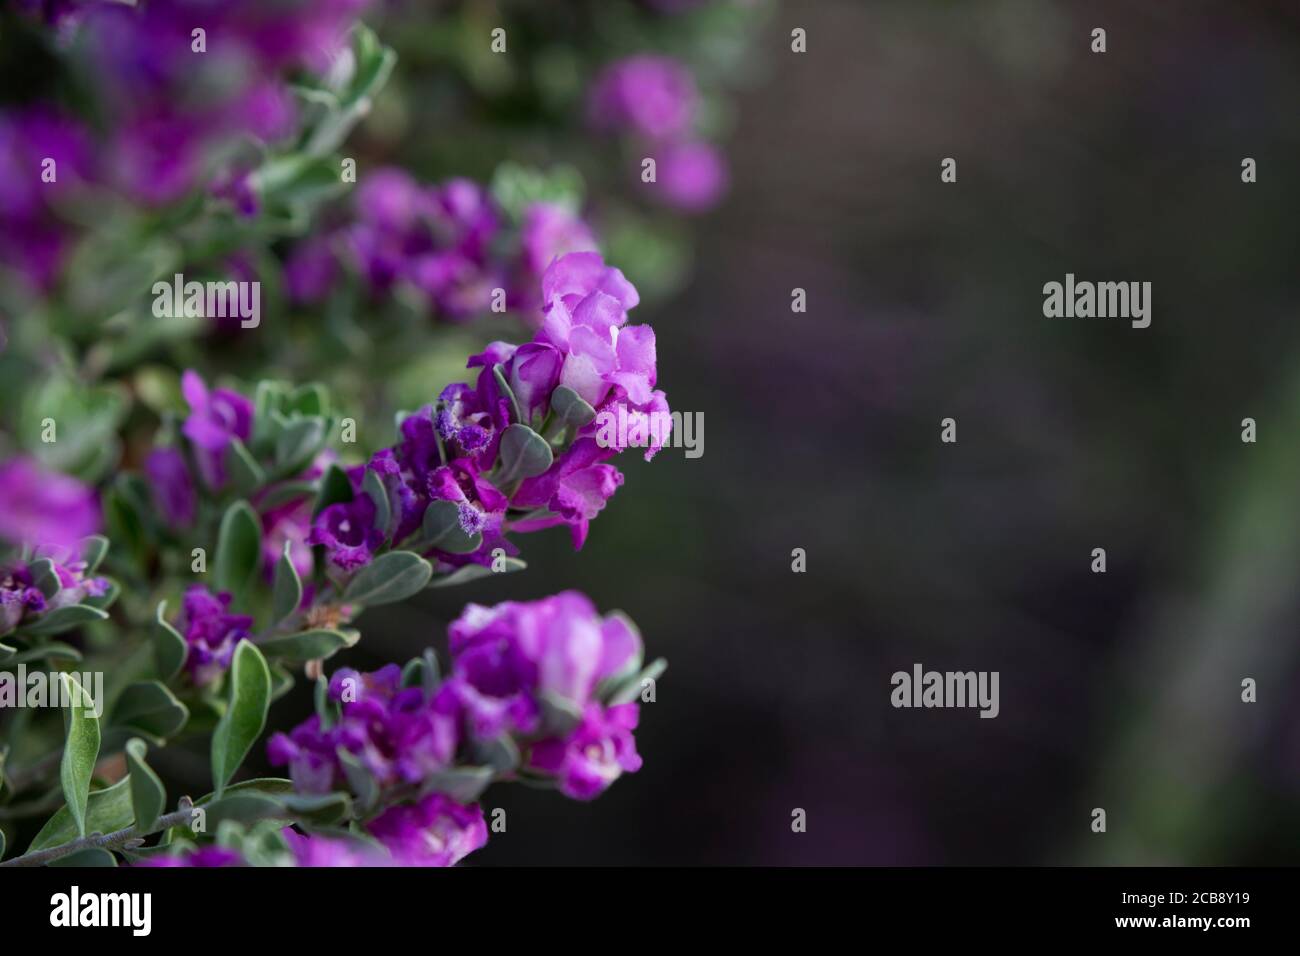 Texas Ranger bush, also known as Texas Sage, blossoms in response to summer rains in Tucson, Arizona, in horizontal closeup with copy space Stock Photo